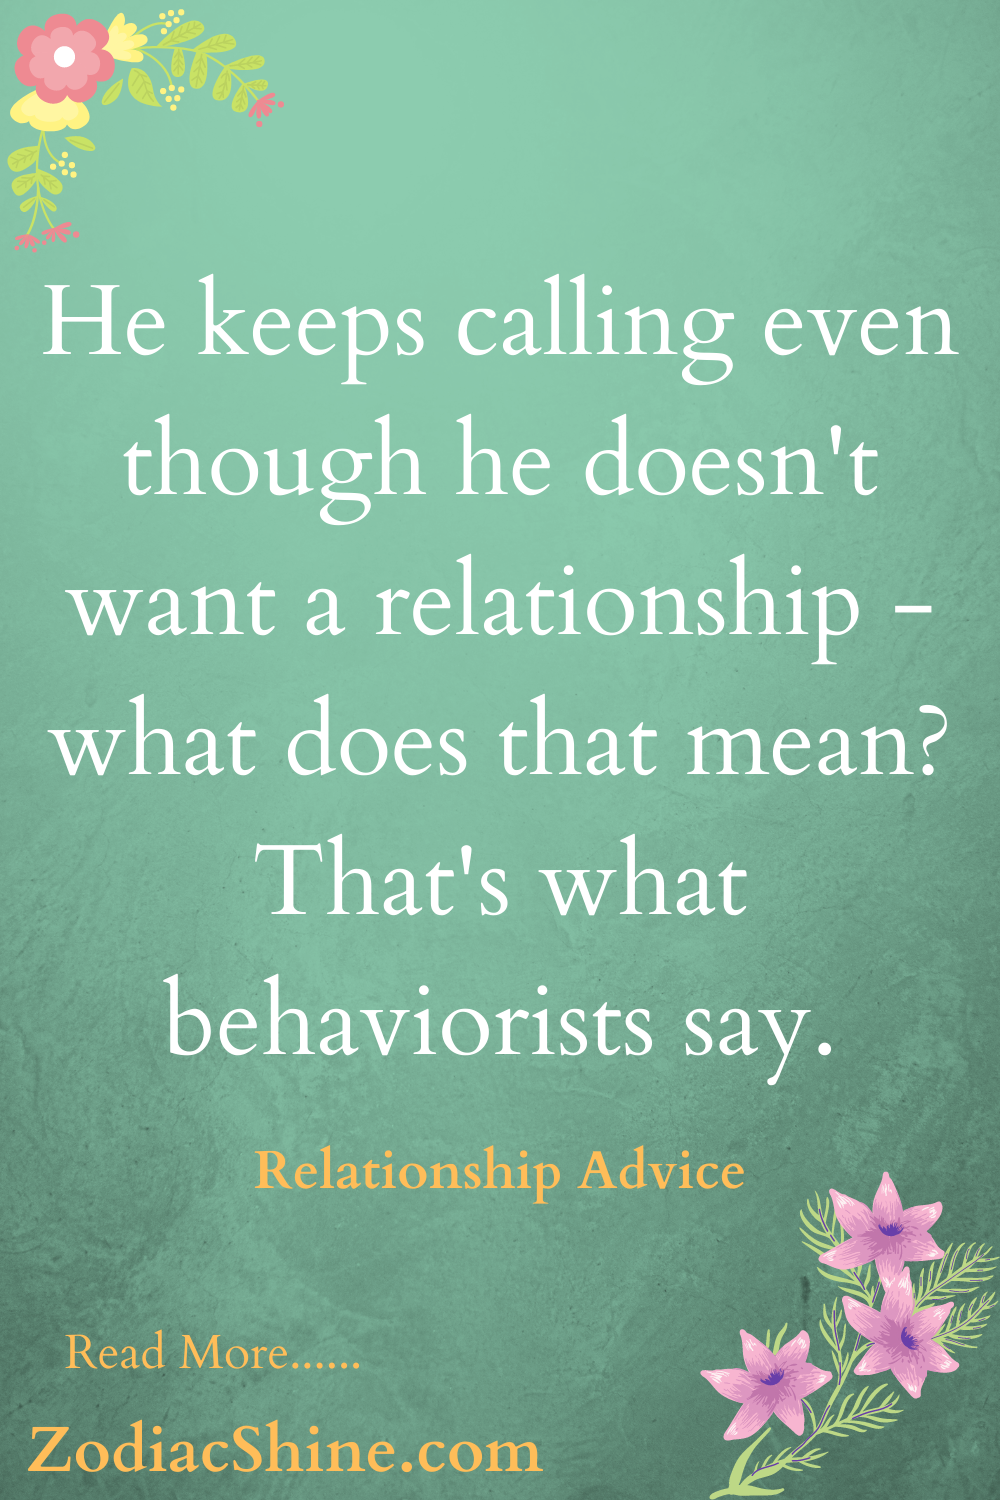 He keeps calling even though he doesn't want a relationship - what does that mean? That's what behaviorists say.